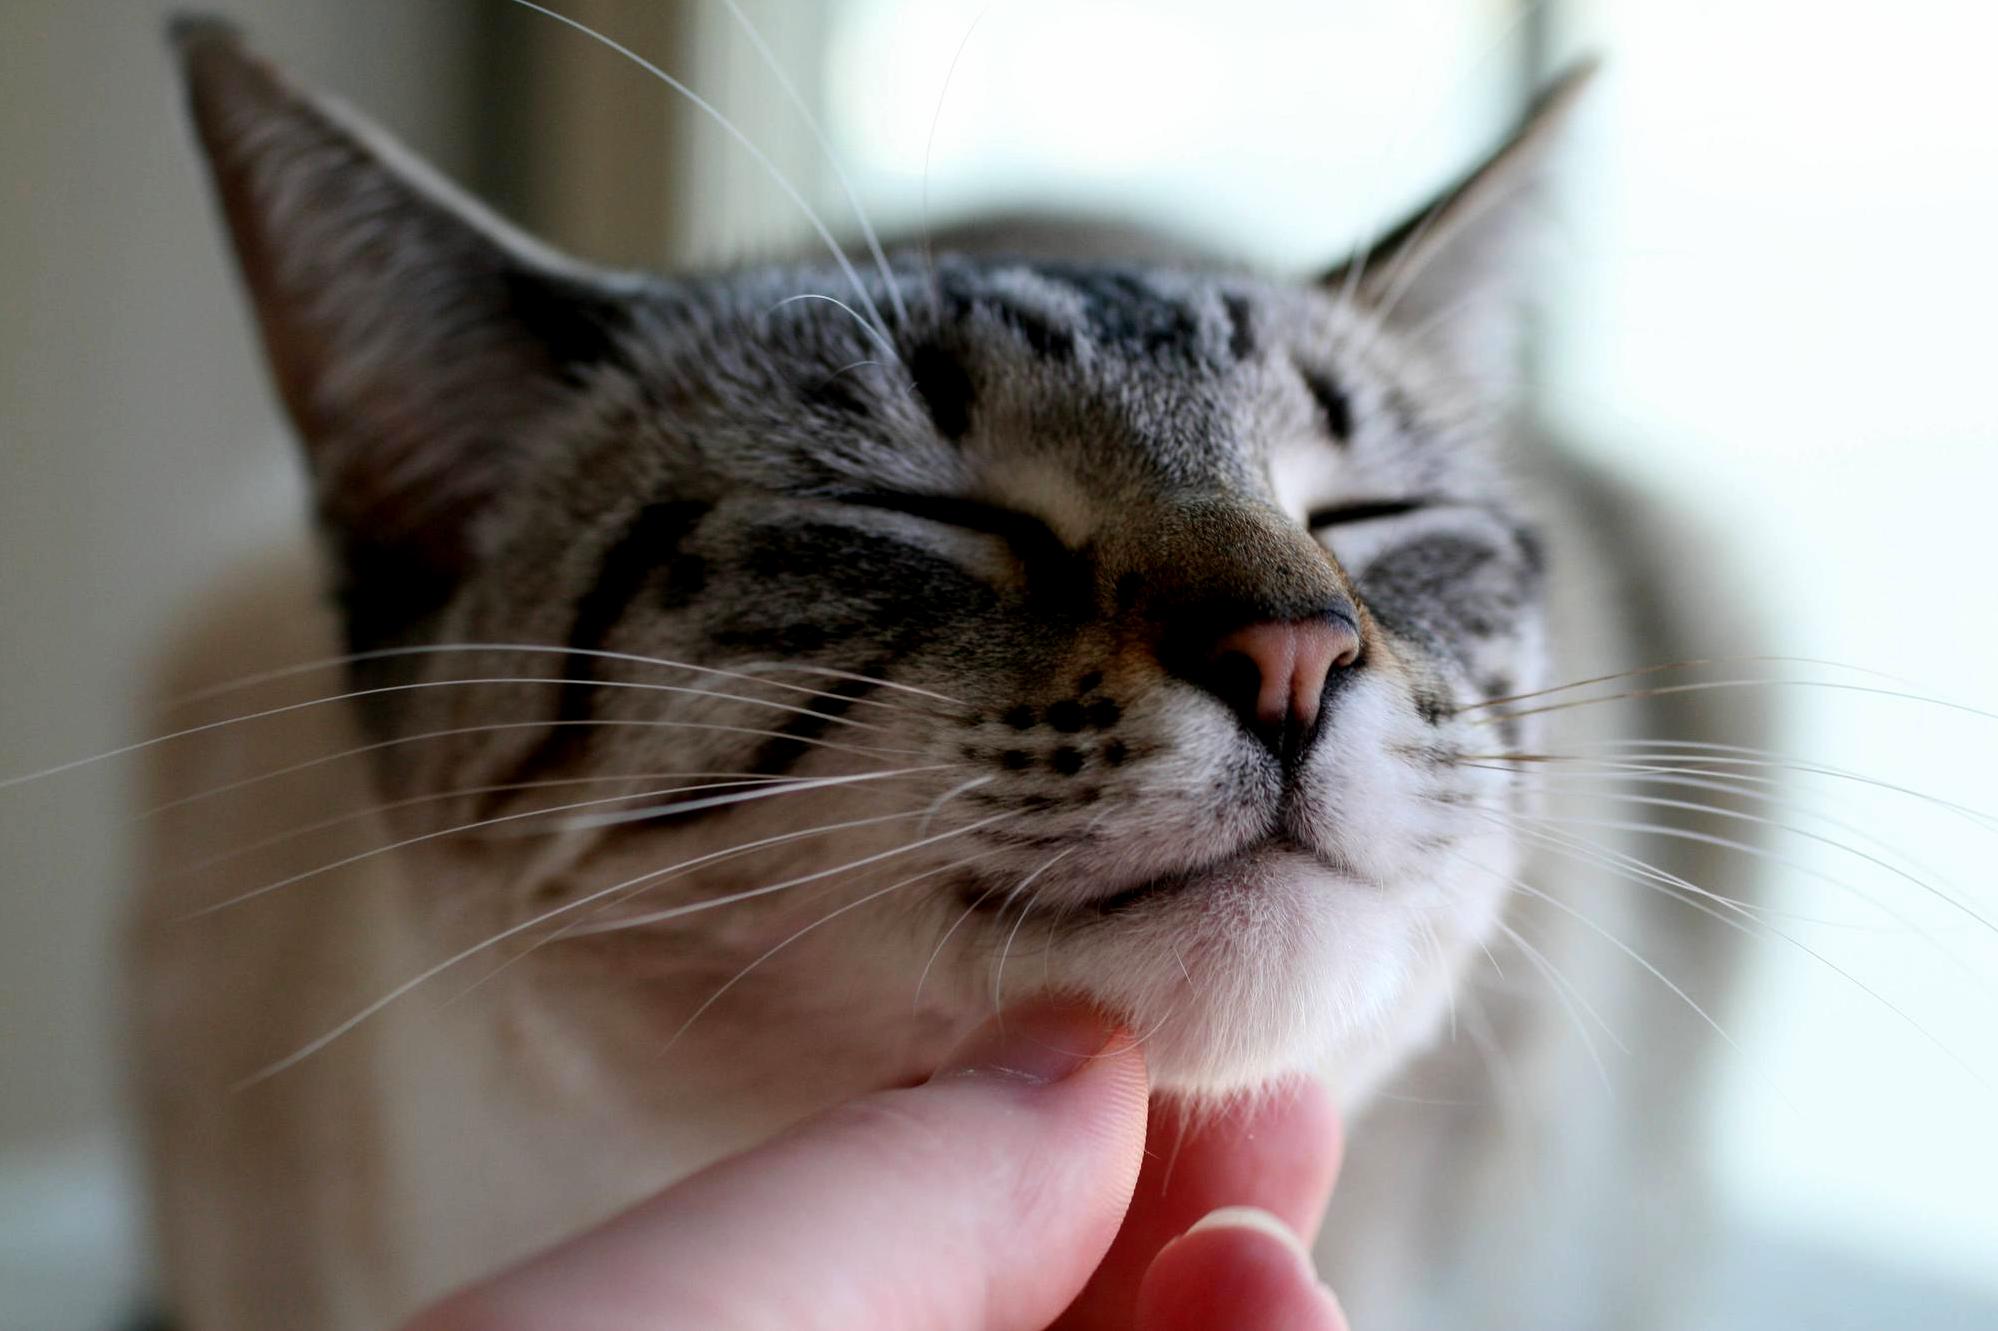 Nothing makes lyra purr like a good chin scratch. | Cute cats HQ - Pictures  of cute cats and kittens Free pictures of funny cats and photo of cute  kittens